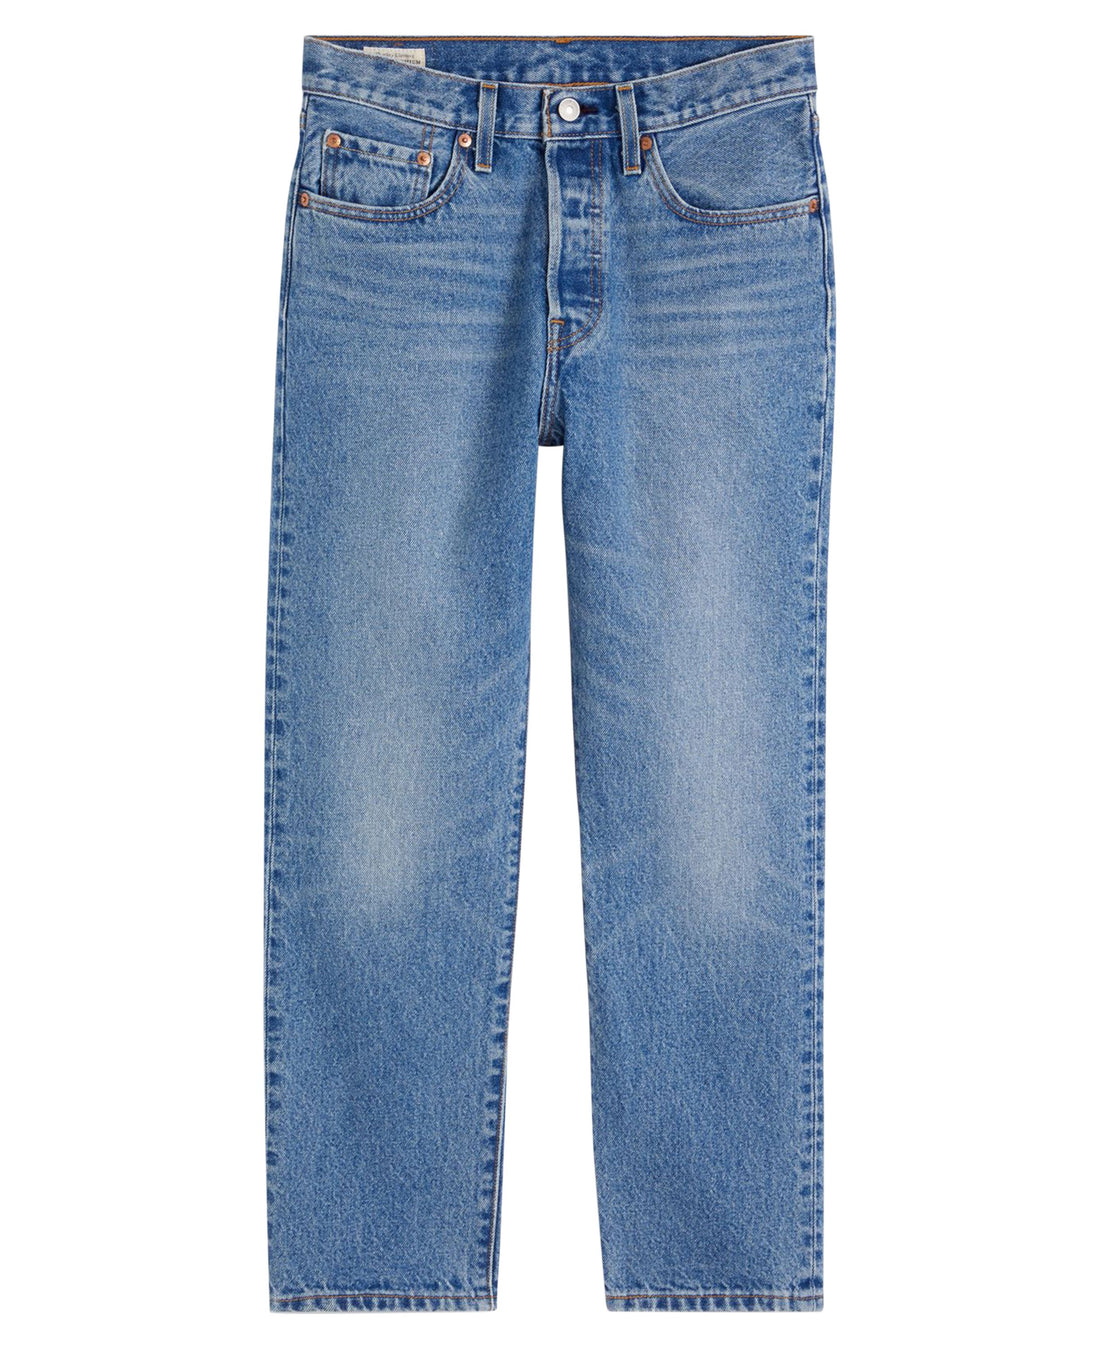 501 Crop Jeans - Must Be Mine